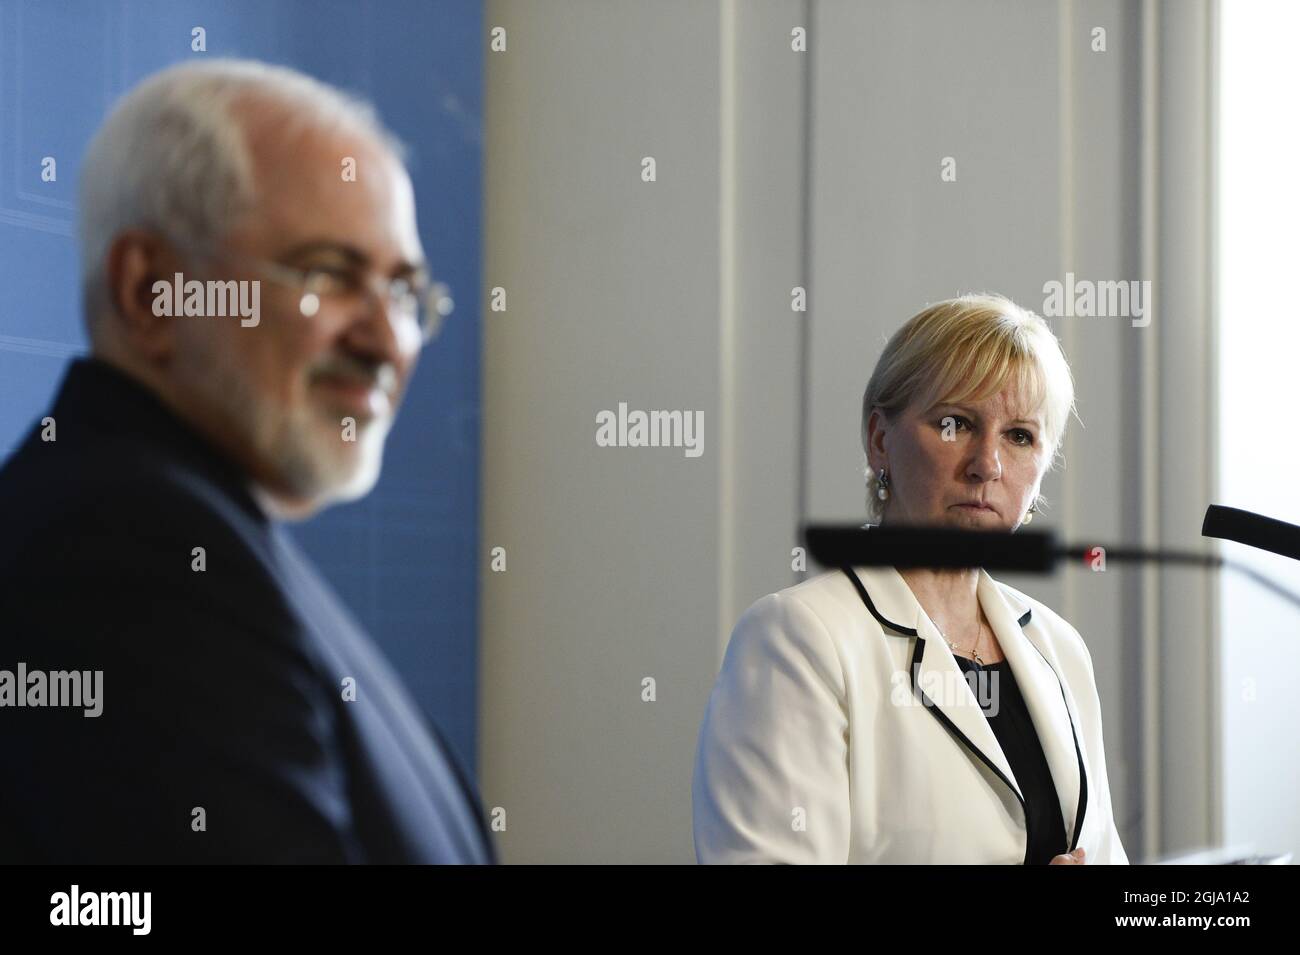 STOCKHOLM 2016-06-01 The Minister of Foreign Affairs of Iran, Mr Mohammad Javad Zarif Khonsari is seen together with Swedish counterpart Margot Wallstrom during a press conference at the Ministry of Foreign Affairs in Stockholm, Sweden, June 1, 2016 The Minister is in Sweden for bilateral talks with the Swedish government. Foto Maja Suslin / TT kod 10300 Stock Photo